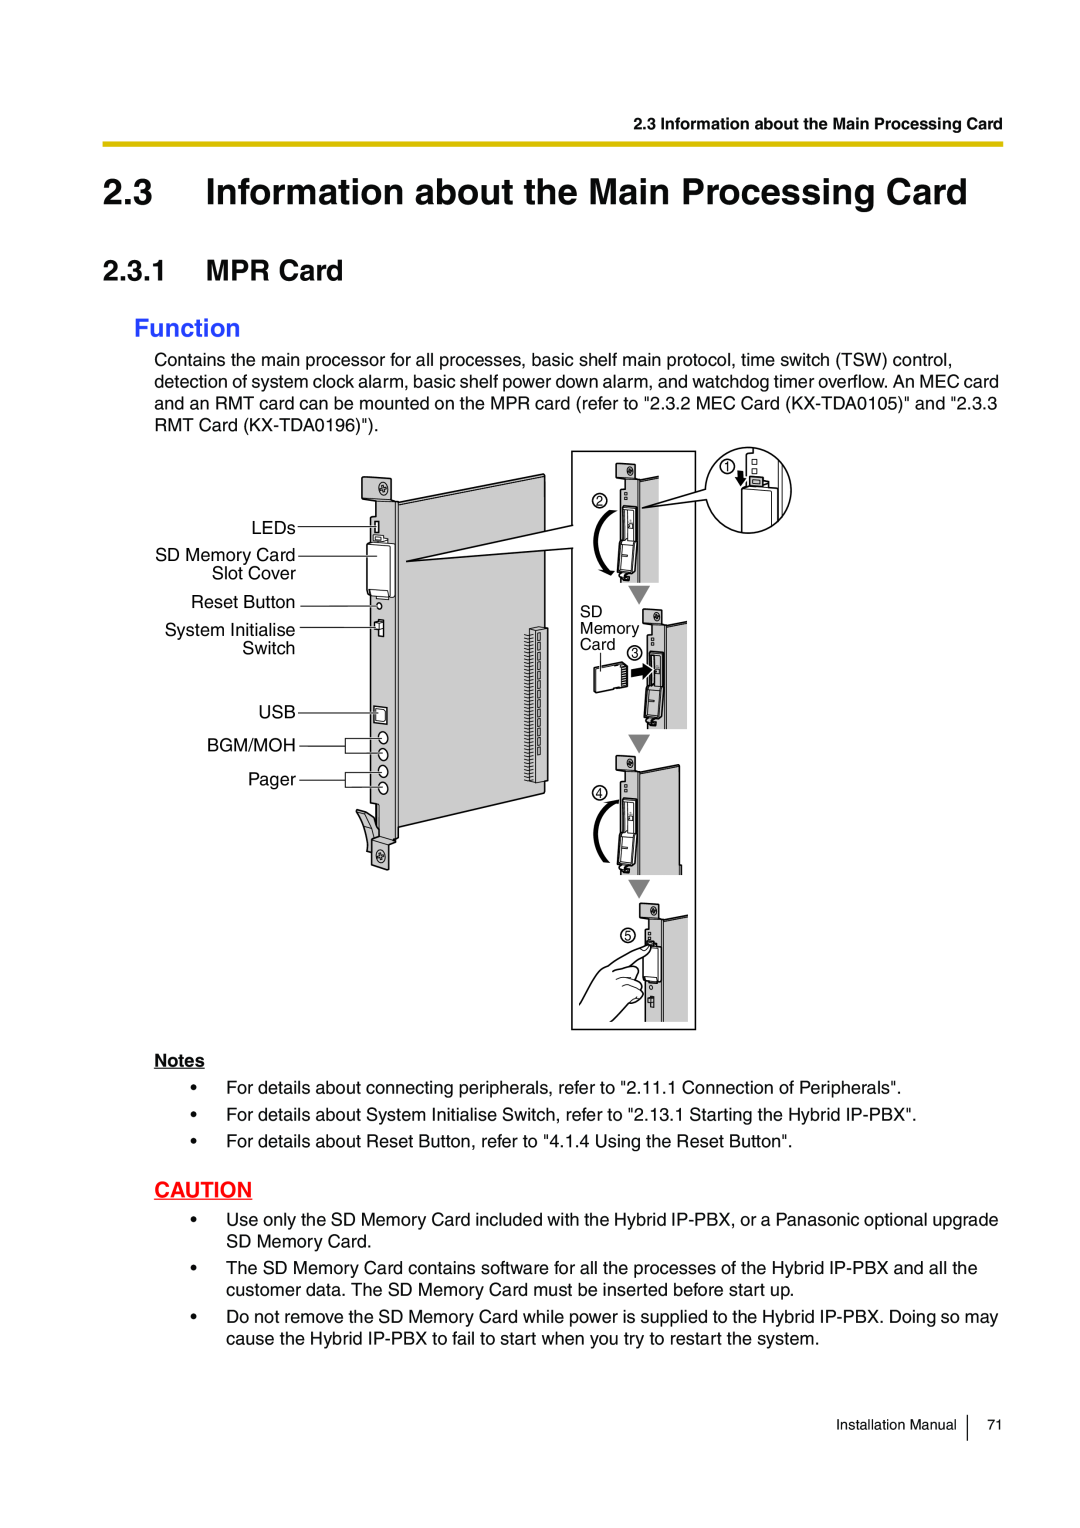 Panasonic KX-TDA100 installation manual Information about the Main Processing Card, MPR Card, Function 